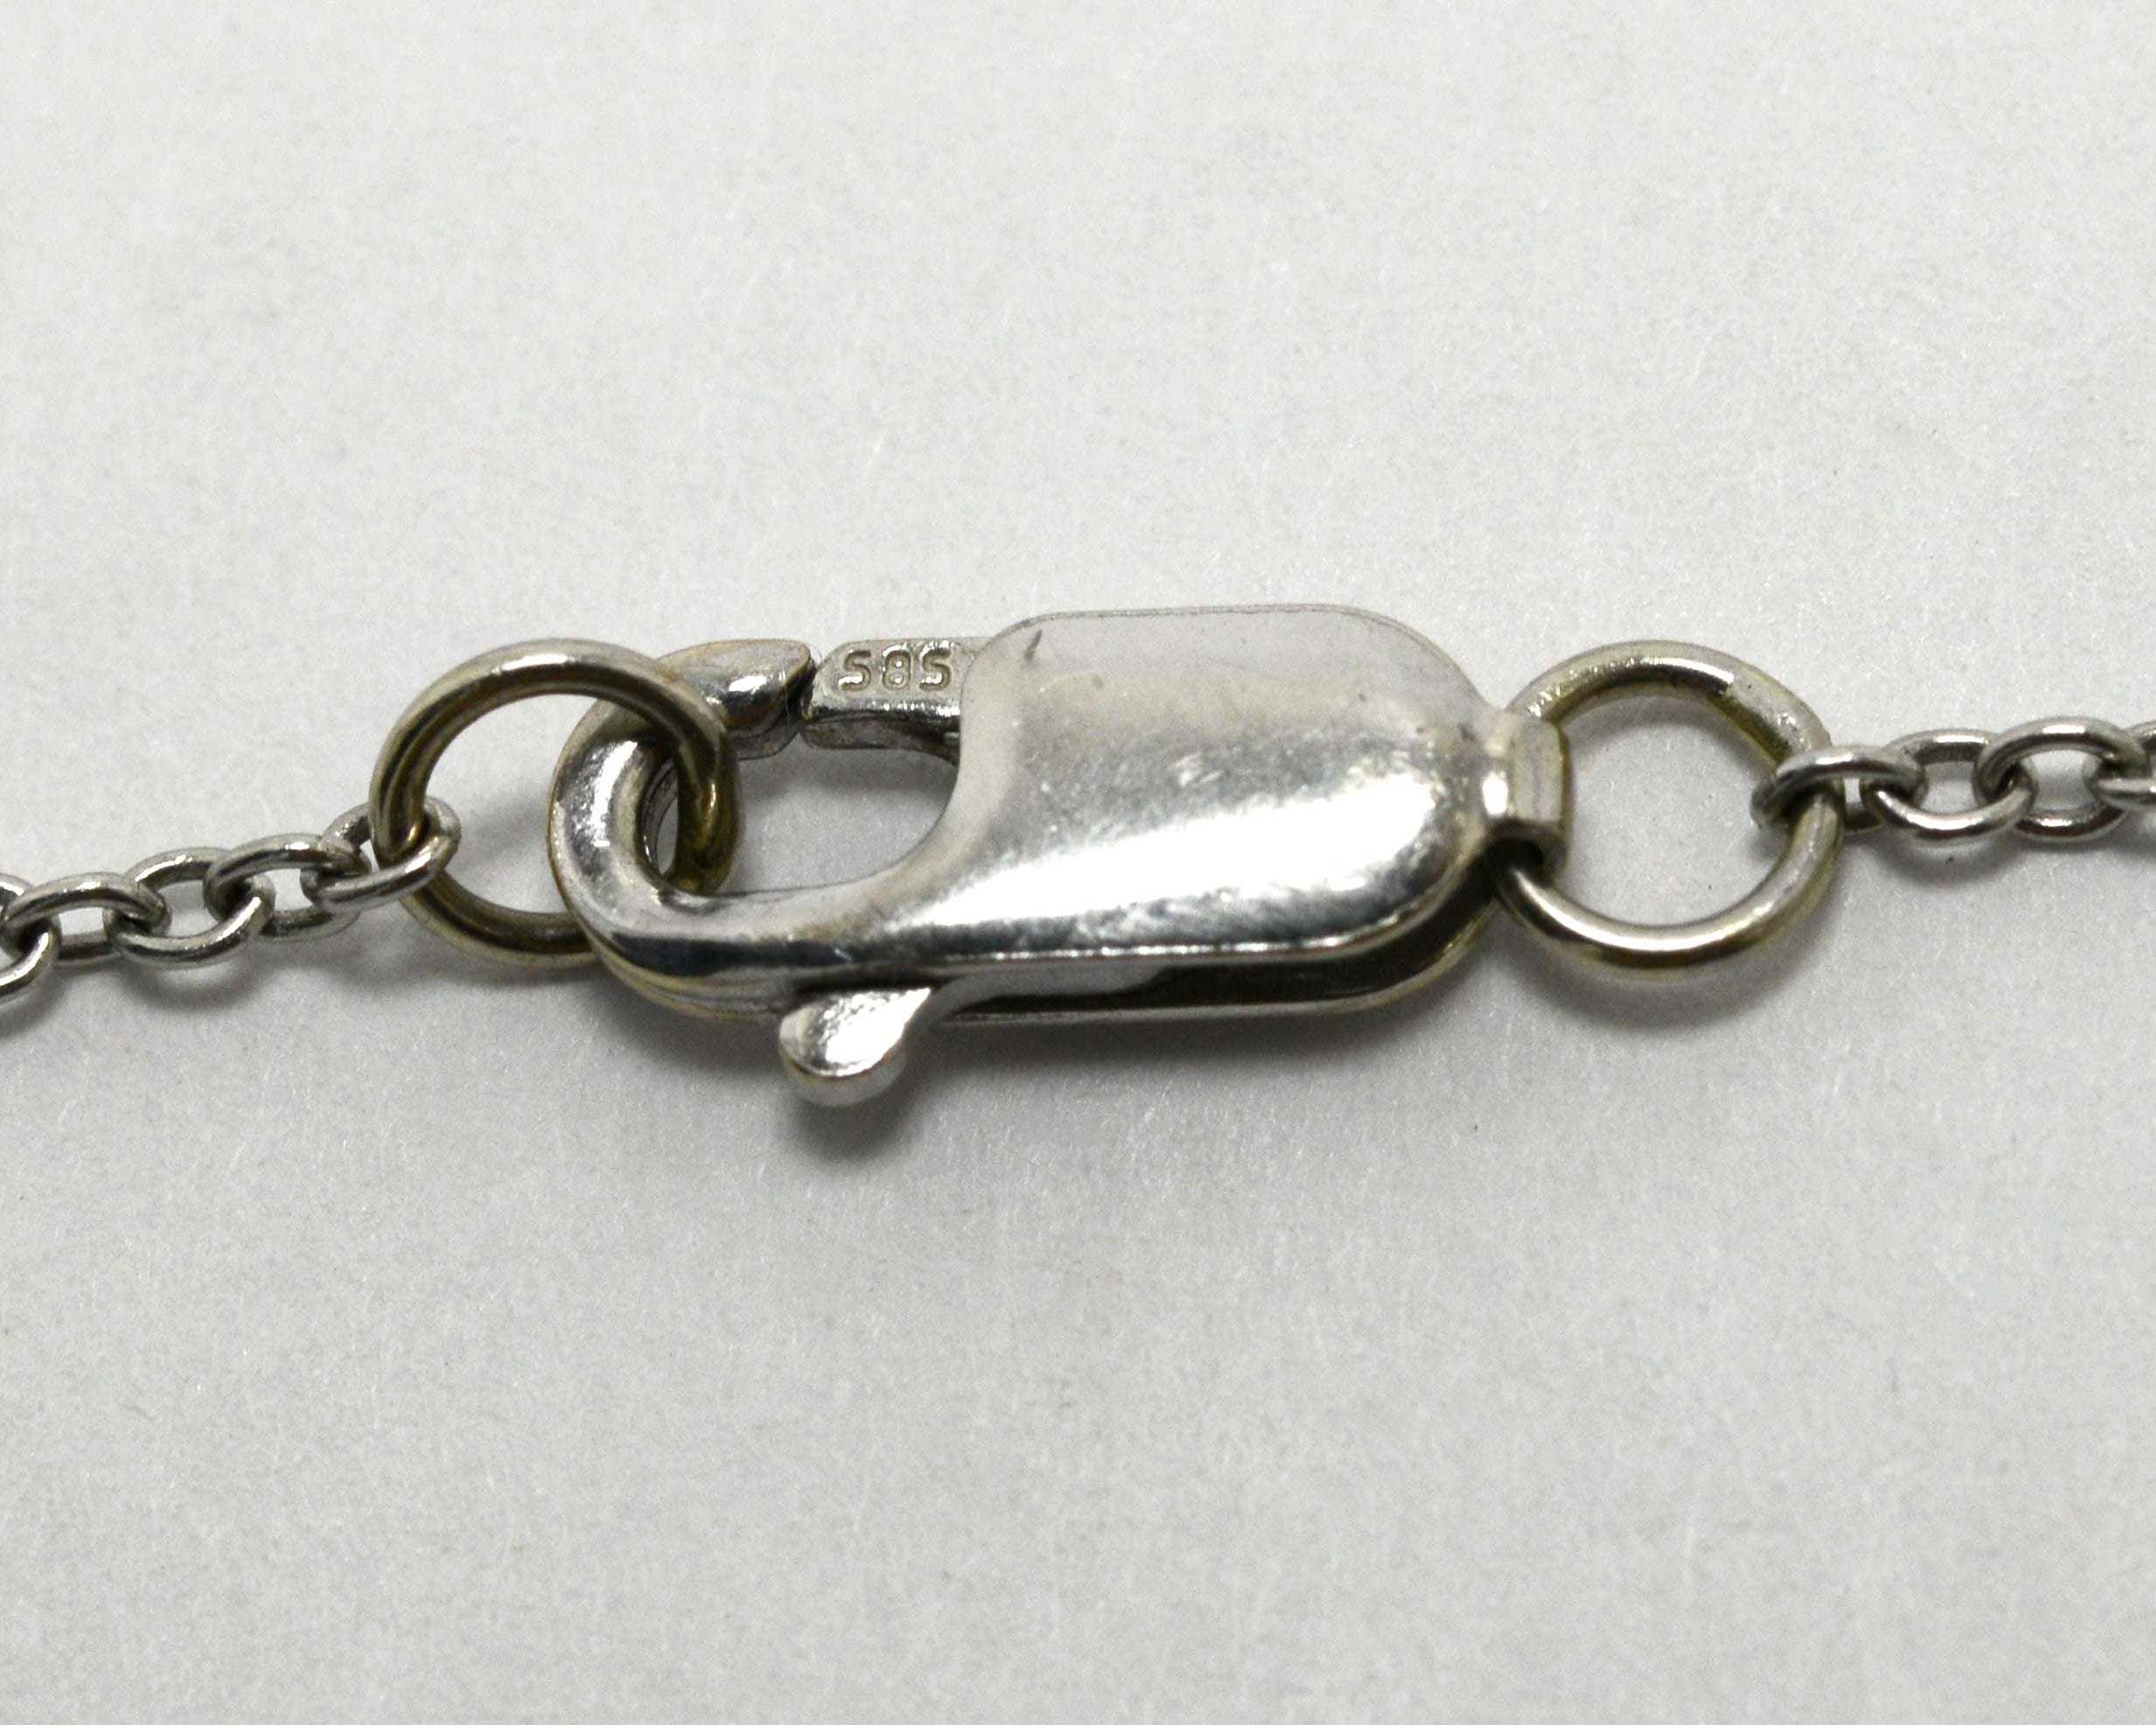 An antique platinum necklace with a spring clasp fastening.